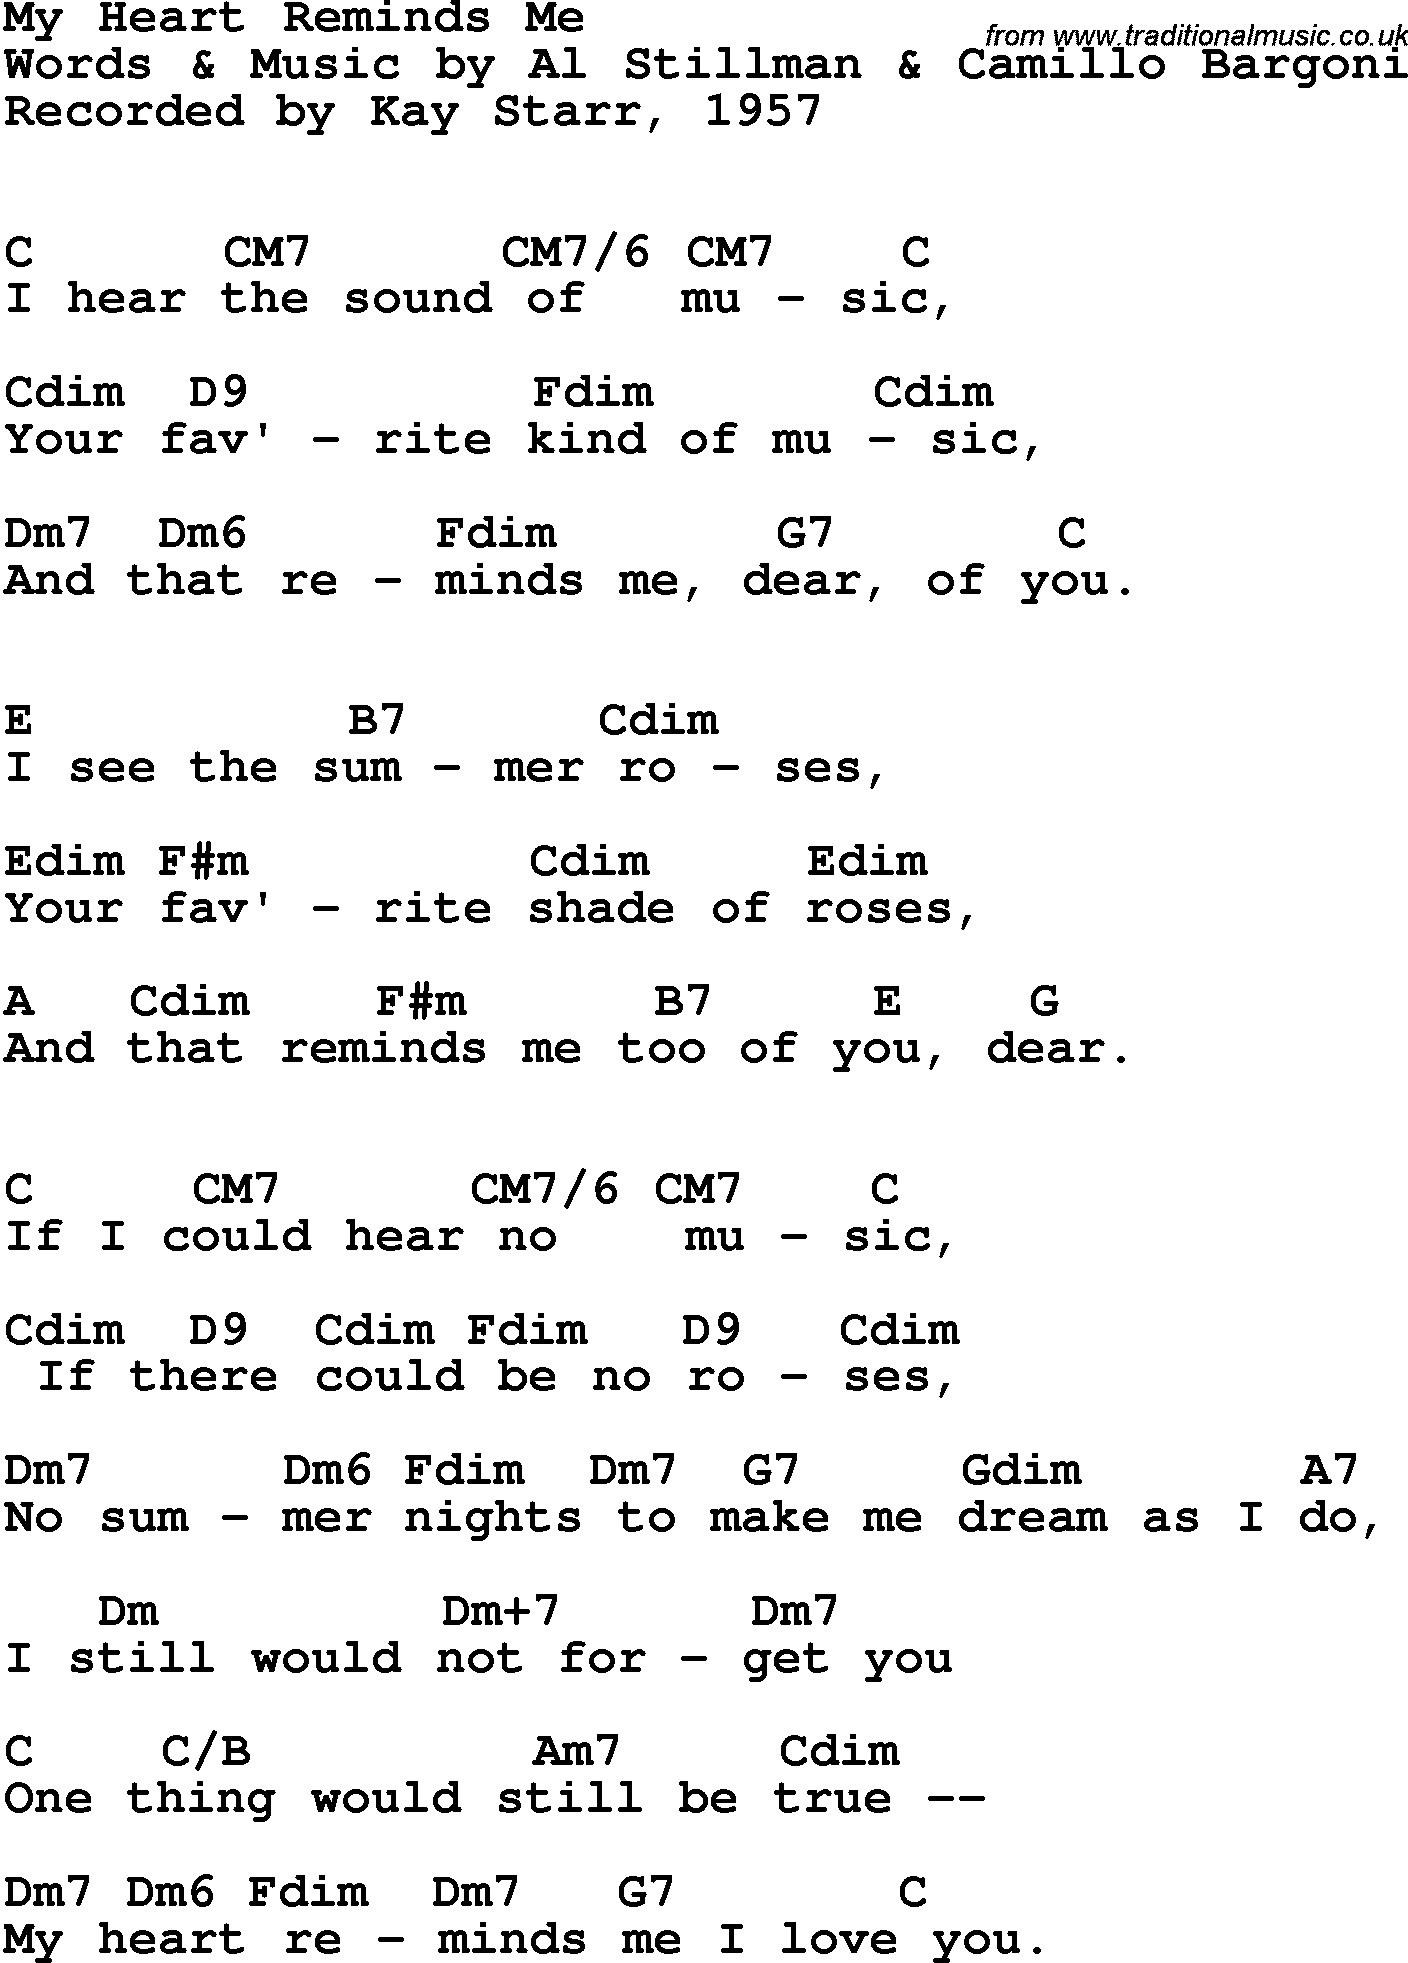 Song Lyrics with guitar chords for My Heart Reminds Me - Kay Starr, 1957